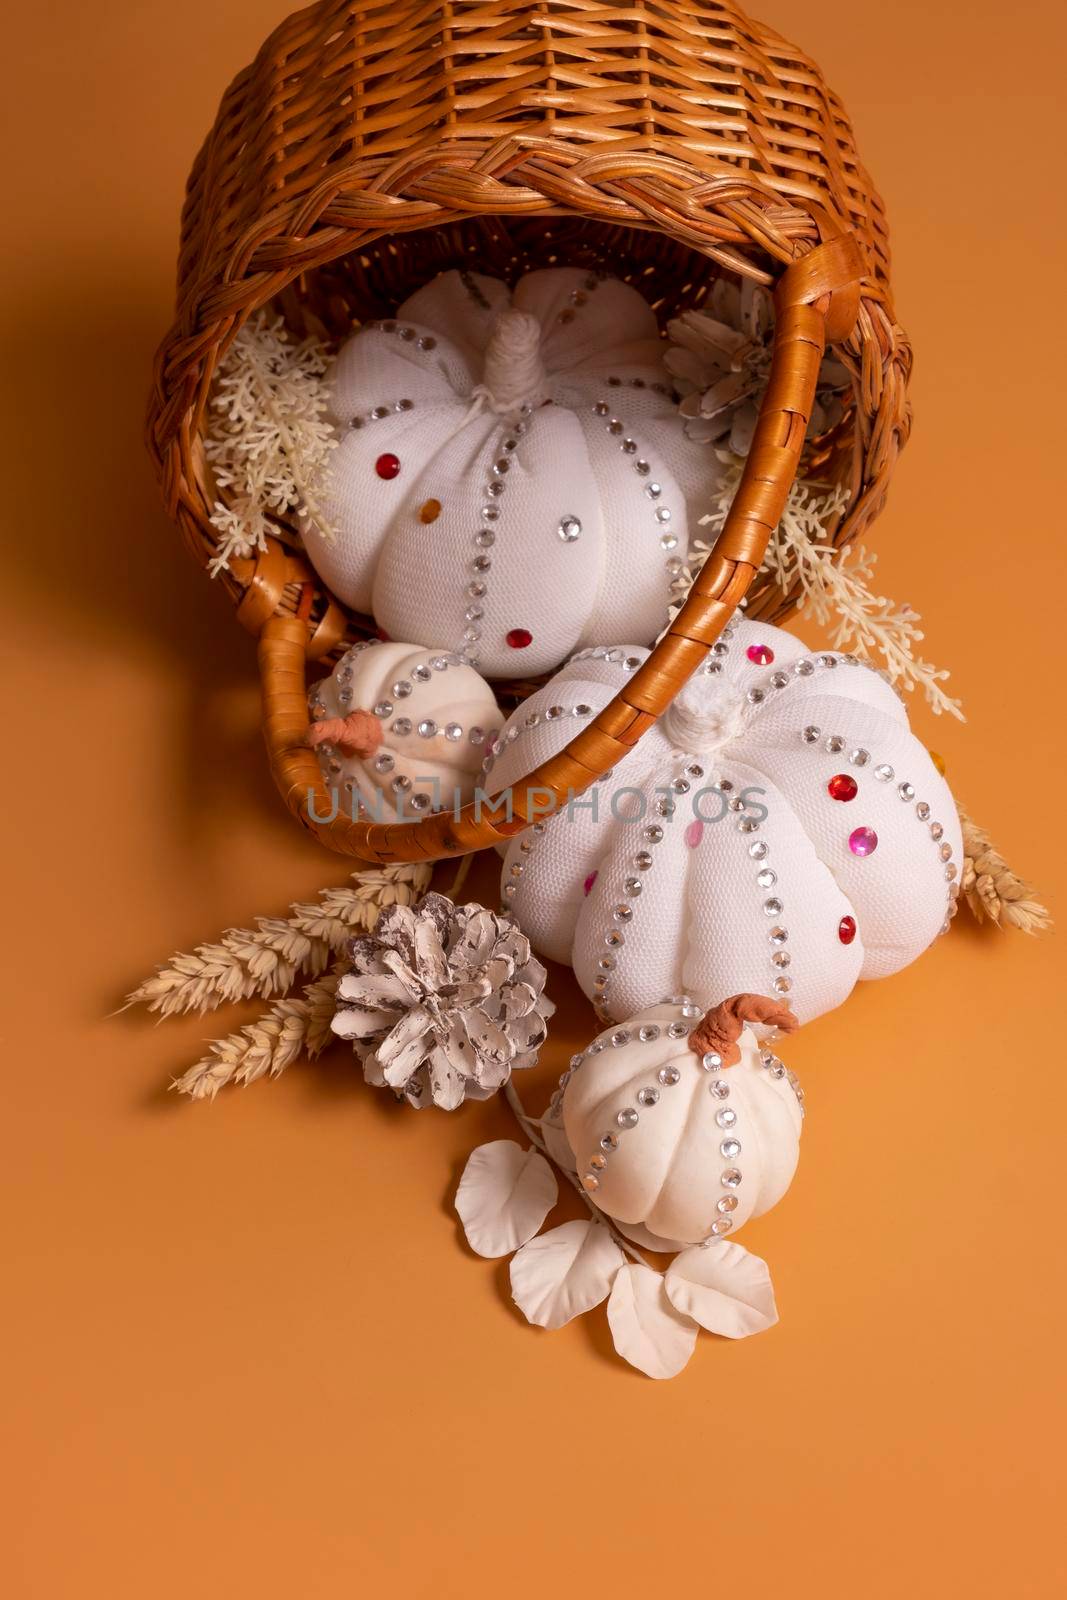 White decorative hand made pumpkins with shiny stones and pine cones in basket on colored background. Thanksgiving day by ssvimaliss